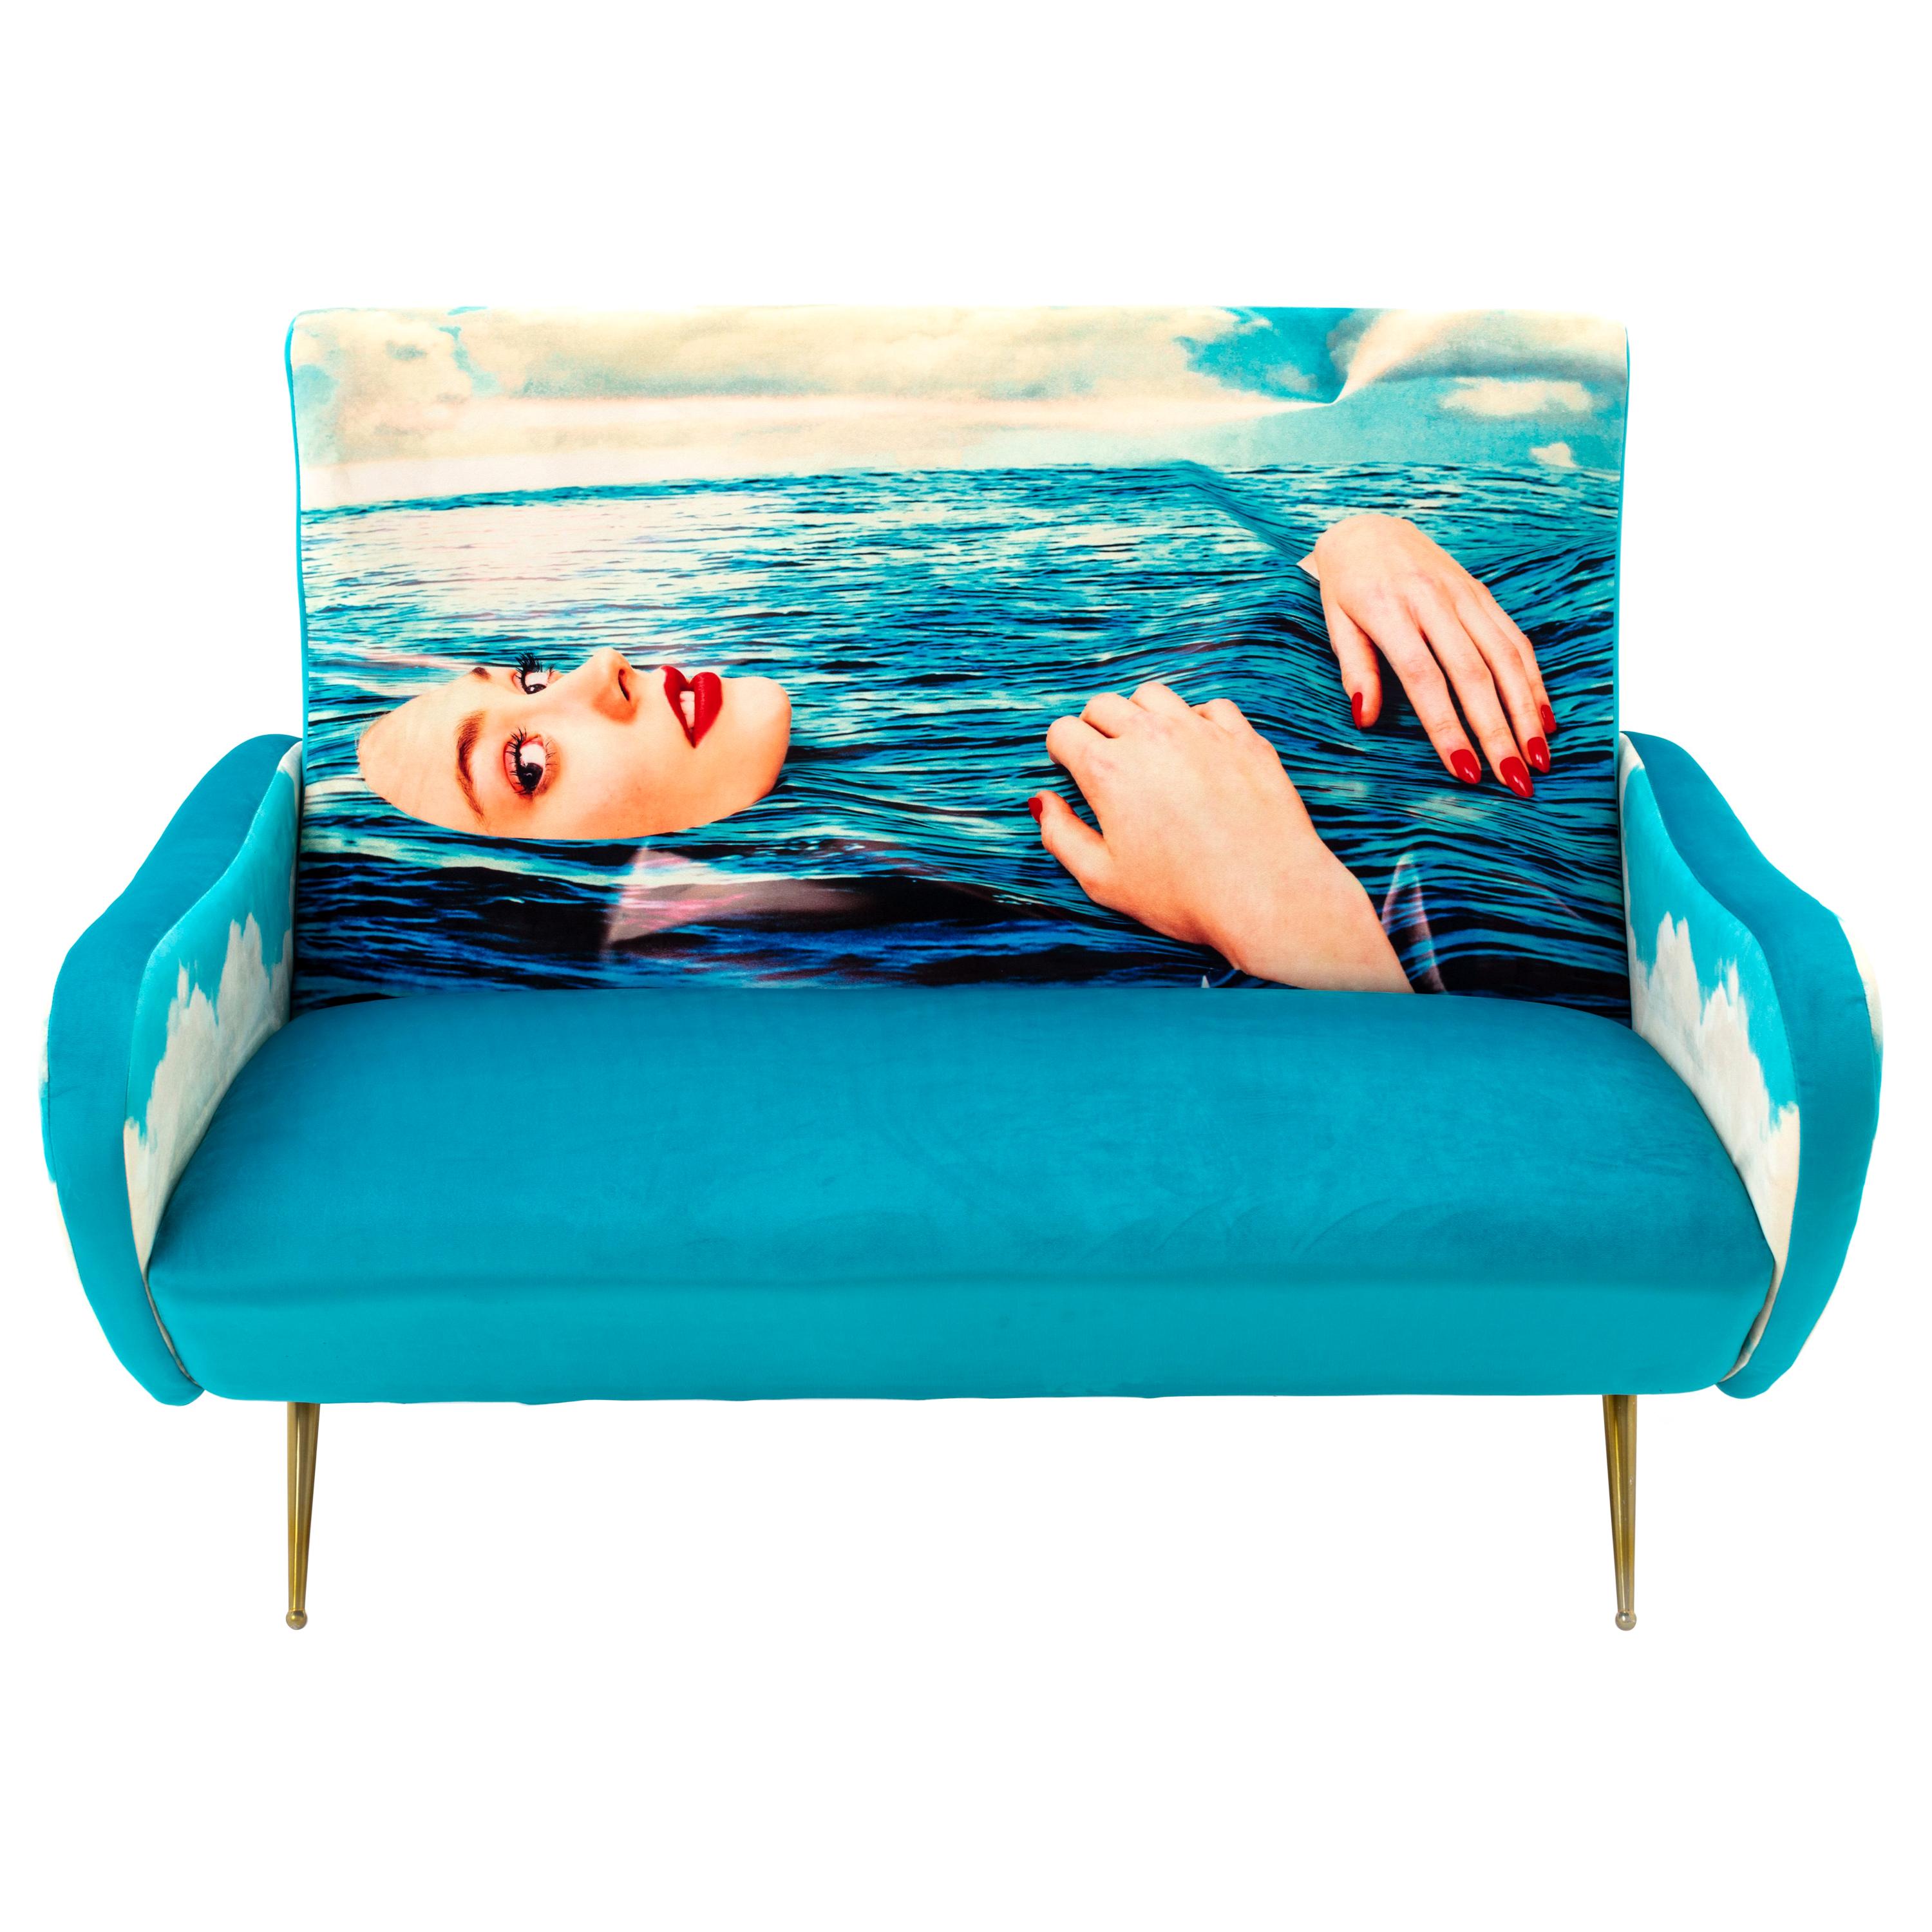 Seletti "Sea Girl" Upholstered Two-Seat Sofa by Toiletpaper